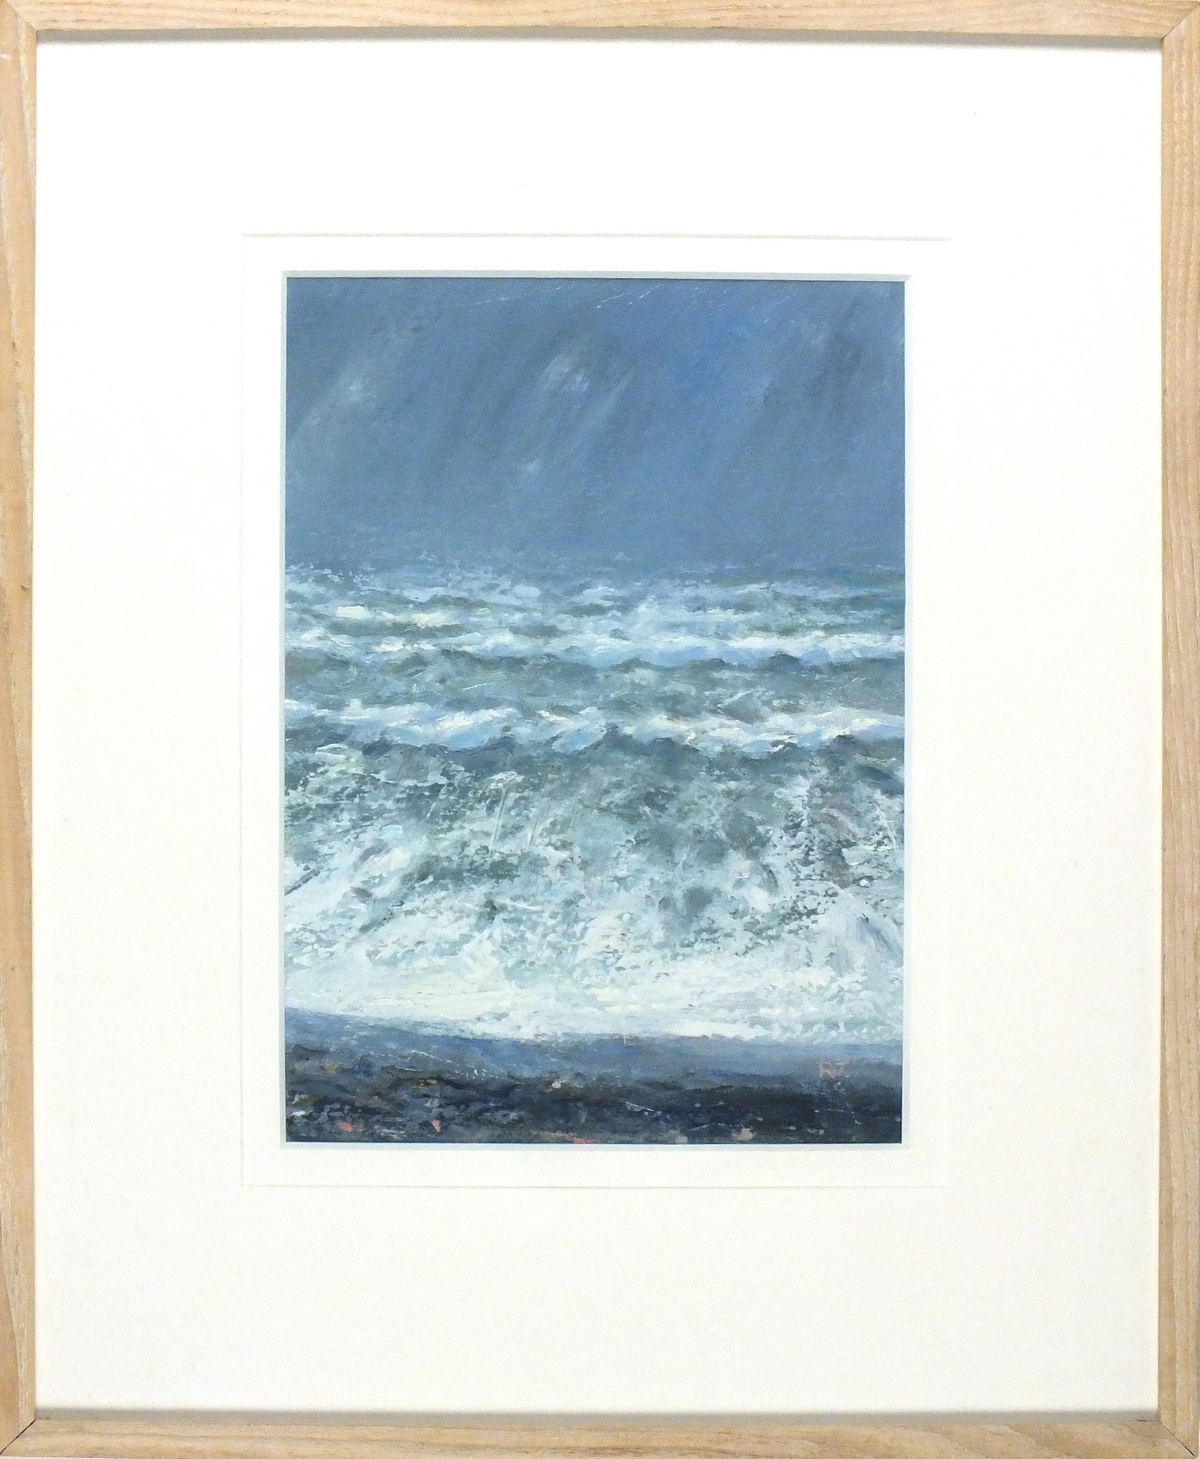 Robert JONES (b.1943), Oil on board, 'Atlantic Gales', Inscribed, signed & dated 2008 to verso, - Image 2 of 2